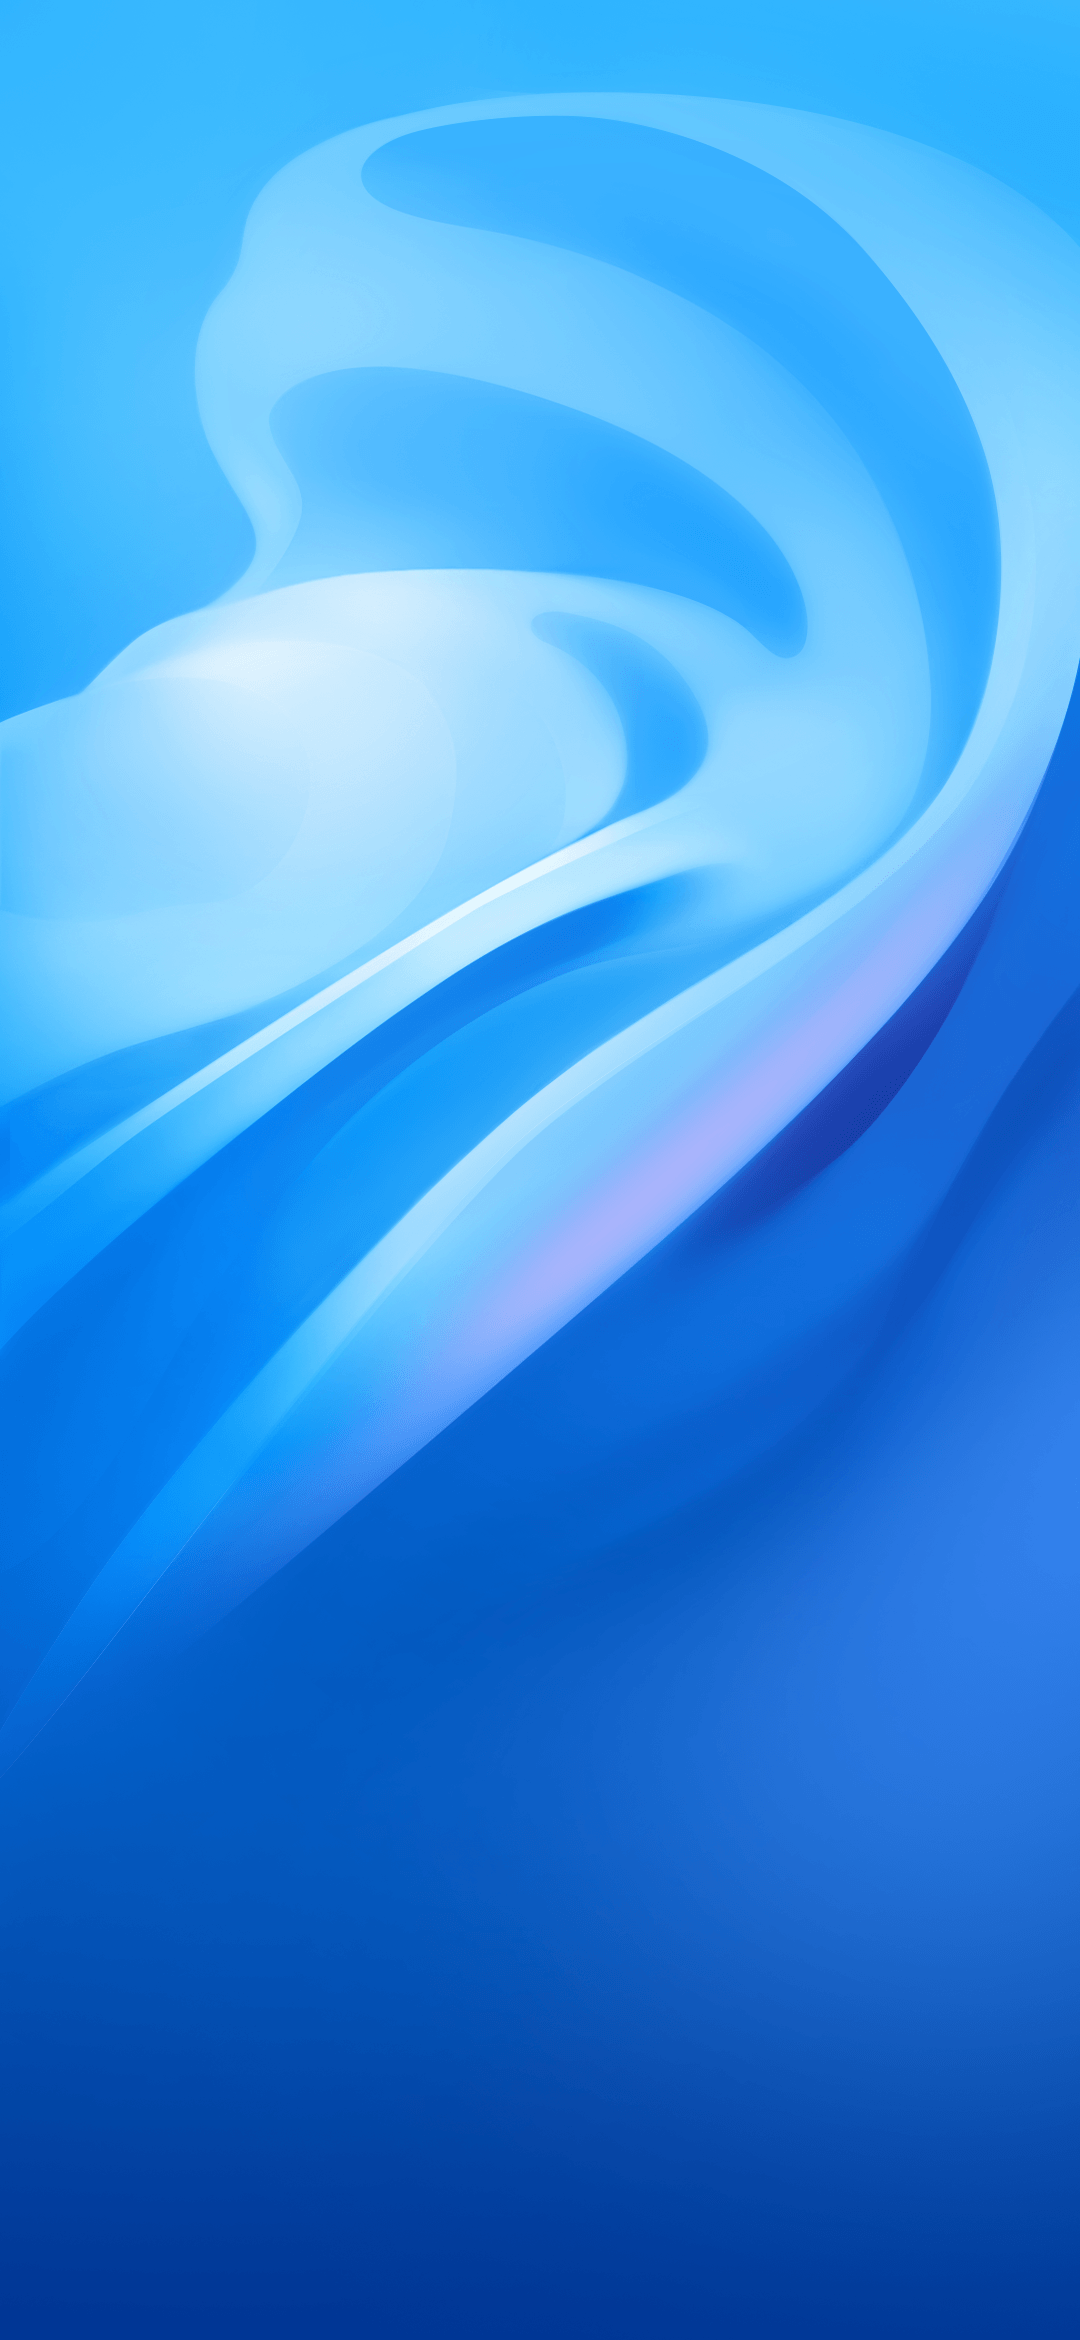 Download Vivo S1 Official Wallpaper Here! Full HD Resolution